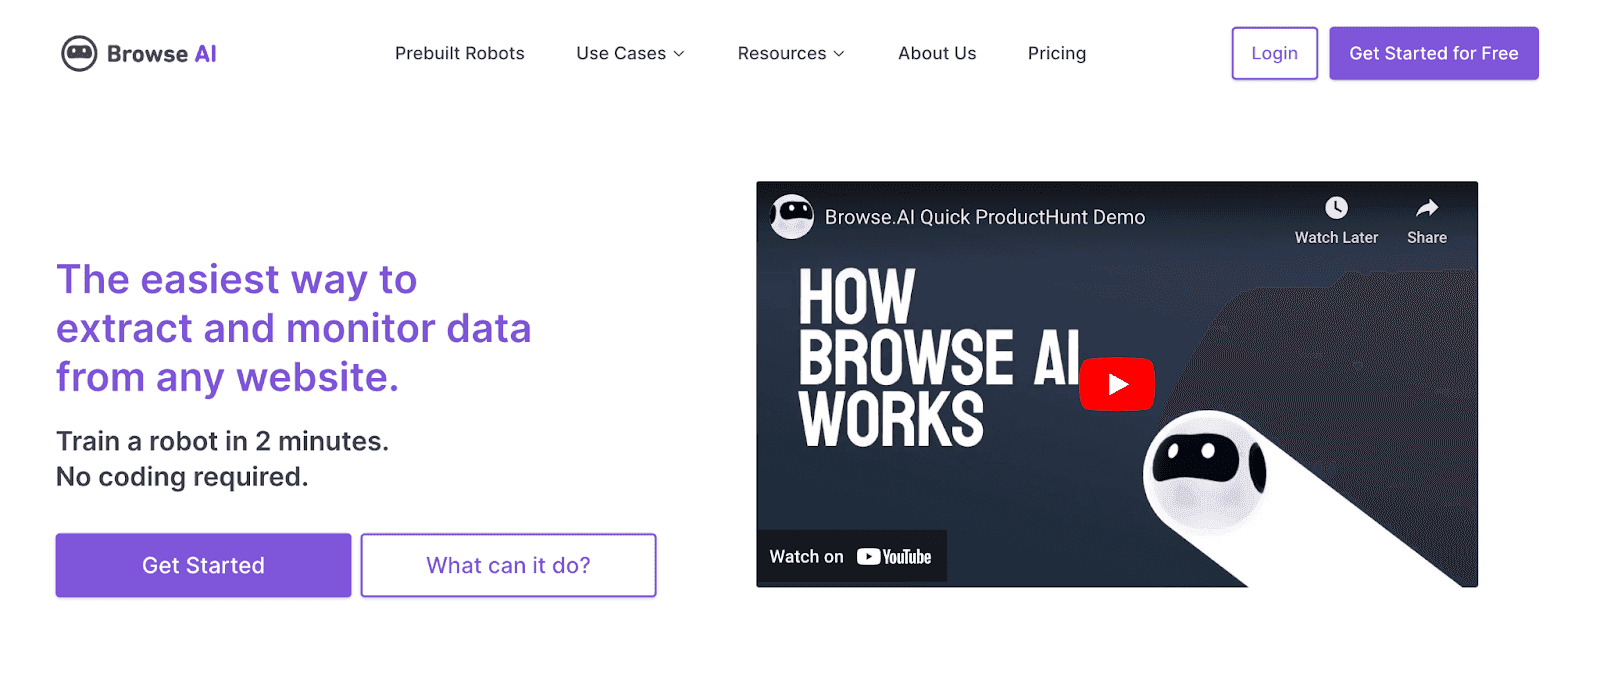 Browse AI website - The easiest way to extract and monitor data from any website